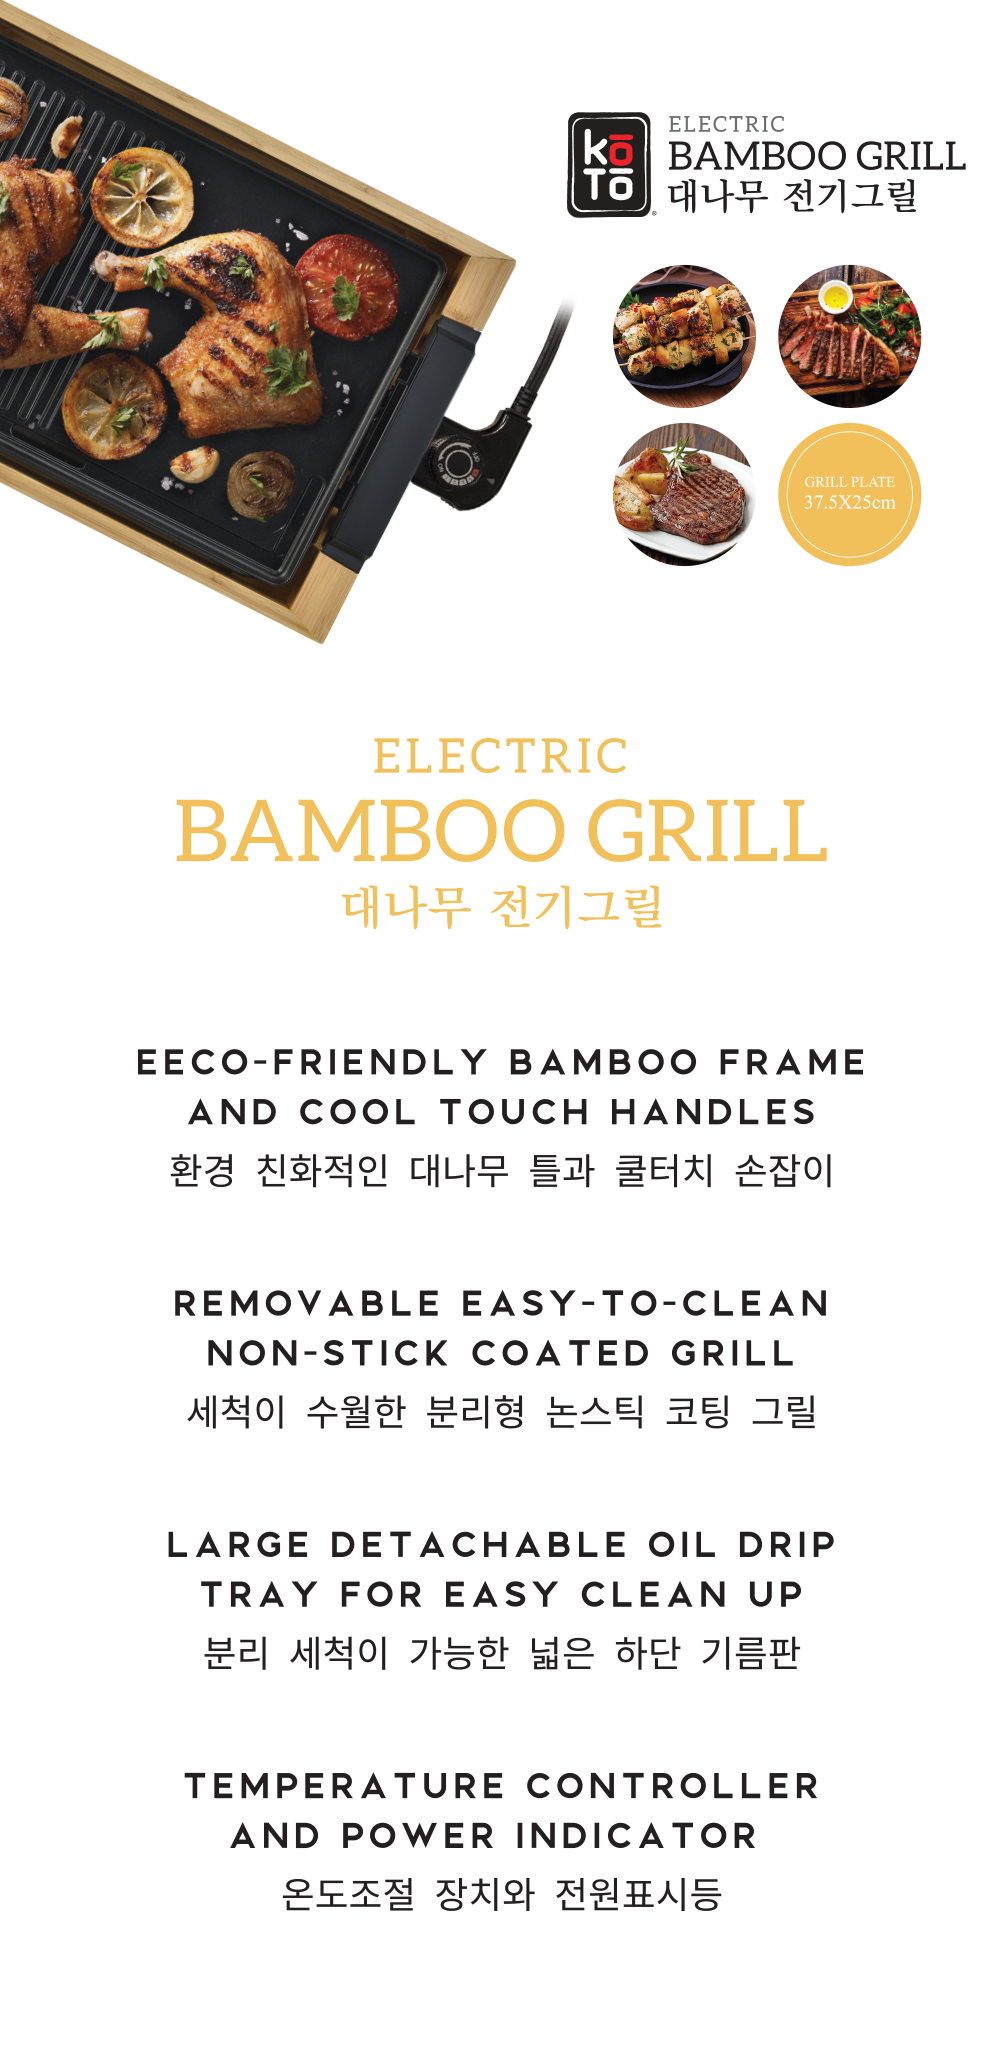 Electric Bamboo Grill